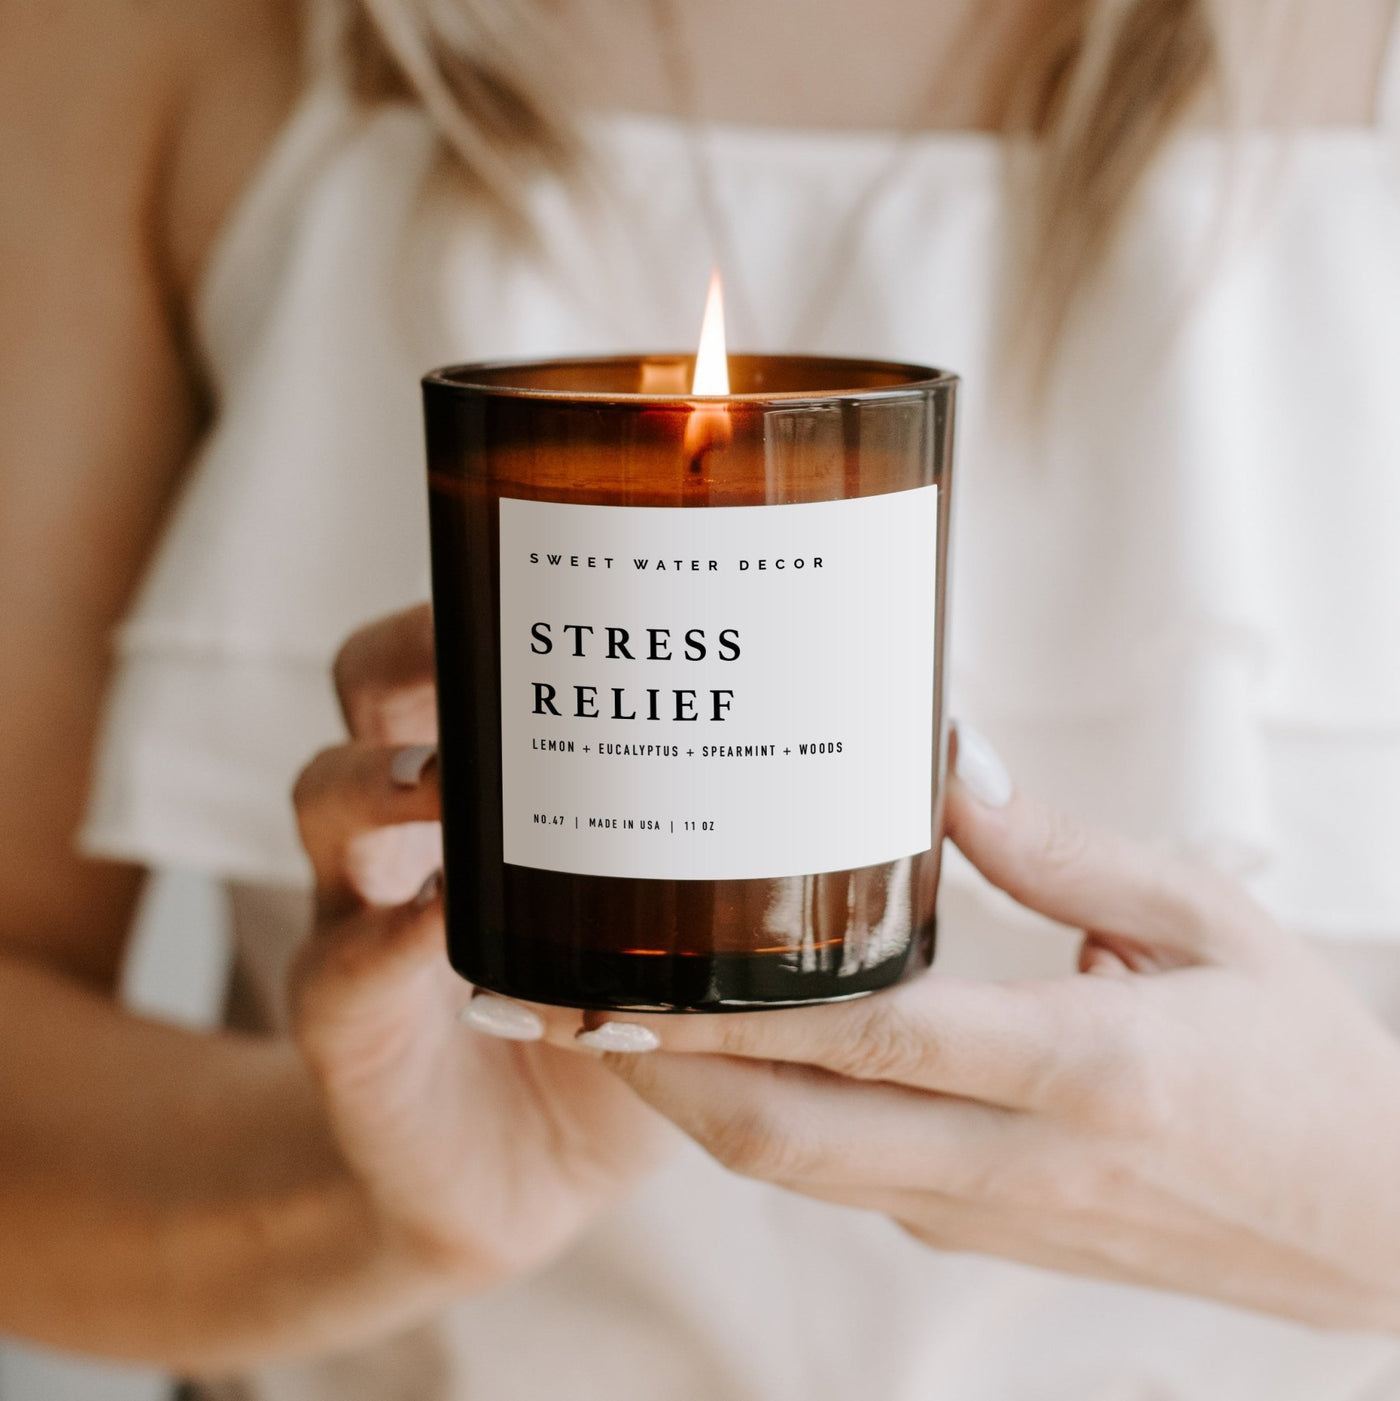 Stress Relief Soy Candle - Amber Jar - 11 oz - Sweet Water Decor - Candles